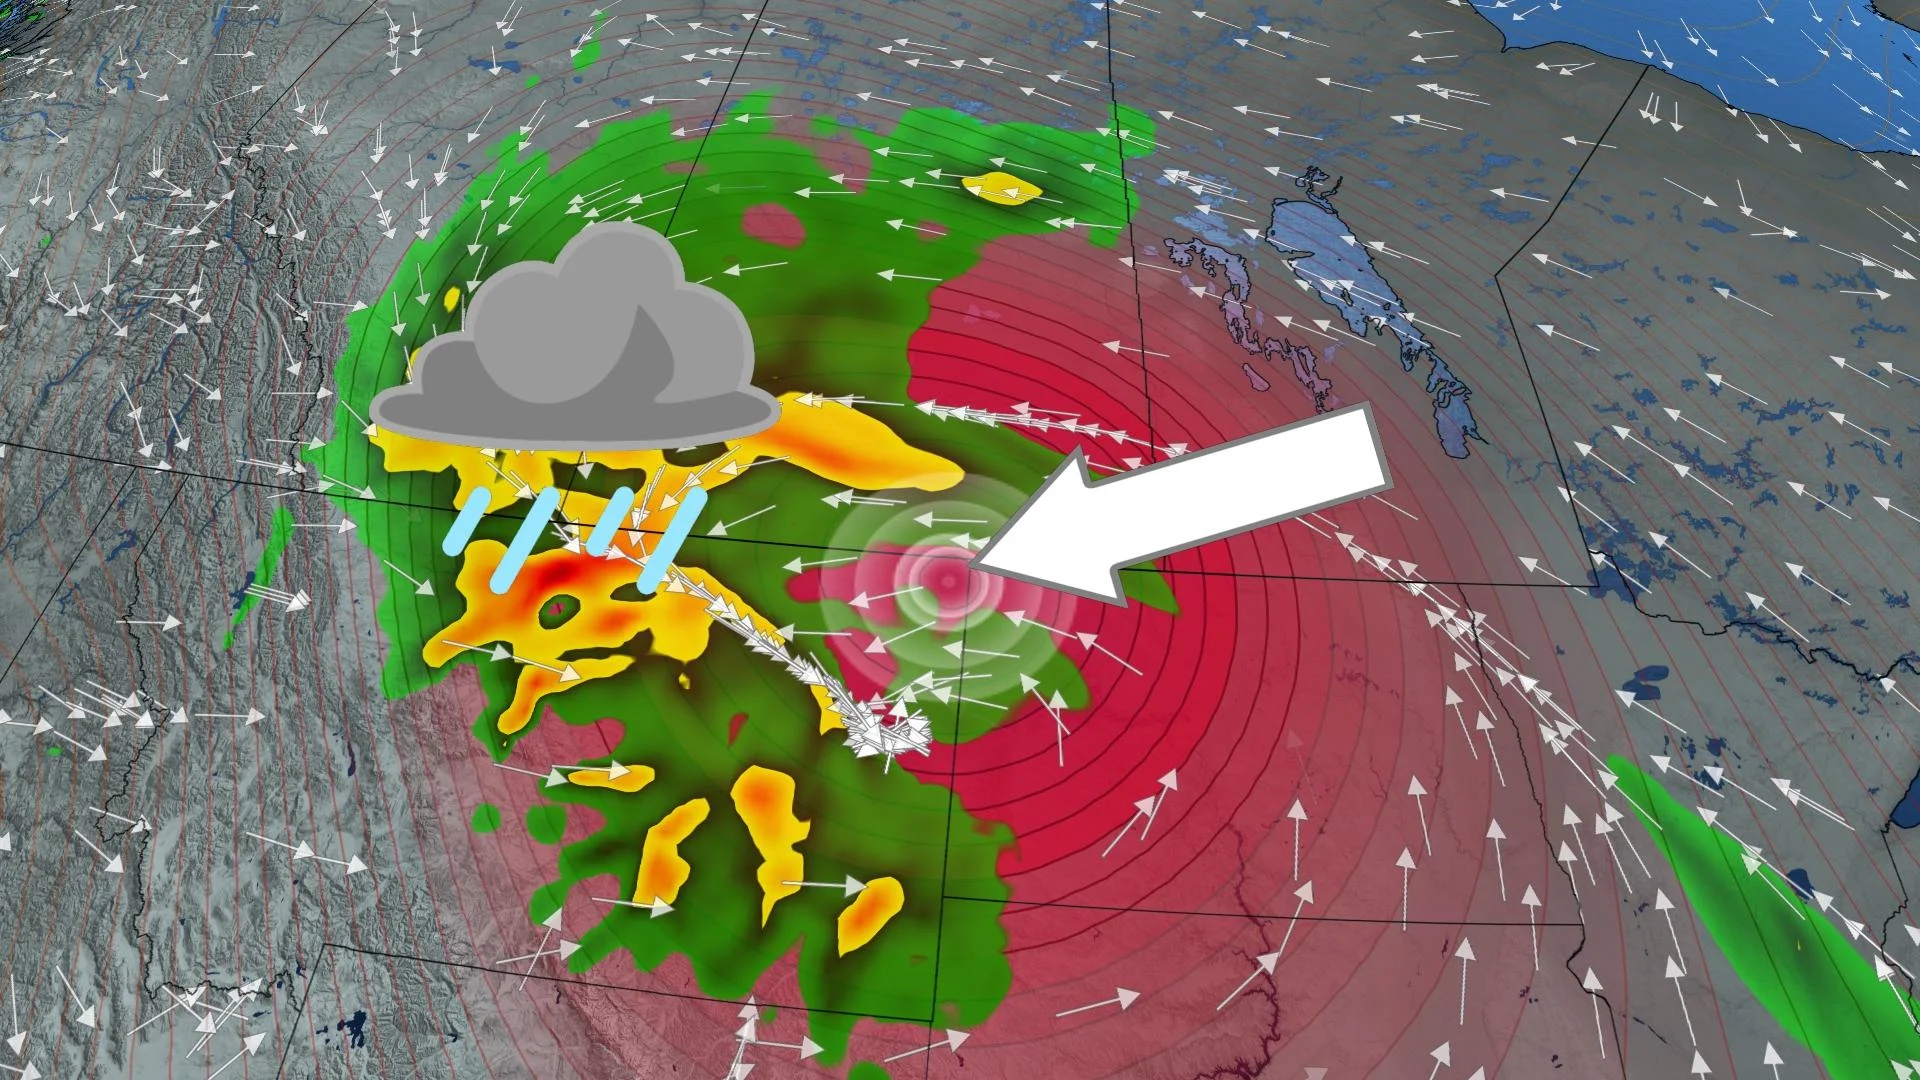 Saskatchewan is in the direct path of an unusually strong mid-spring storm. Timing and details, here